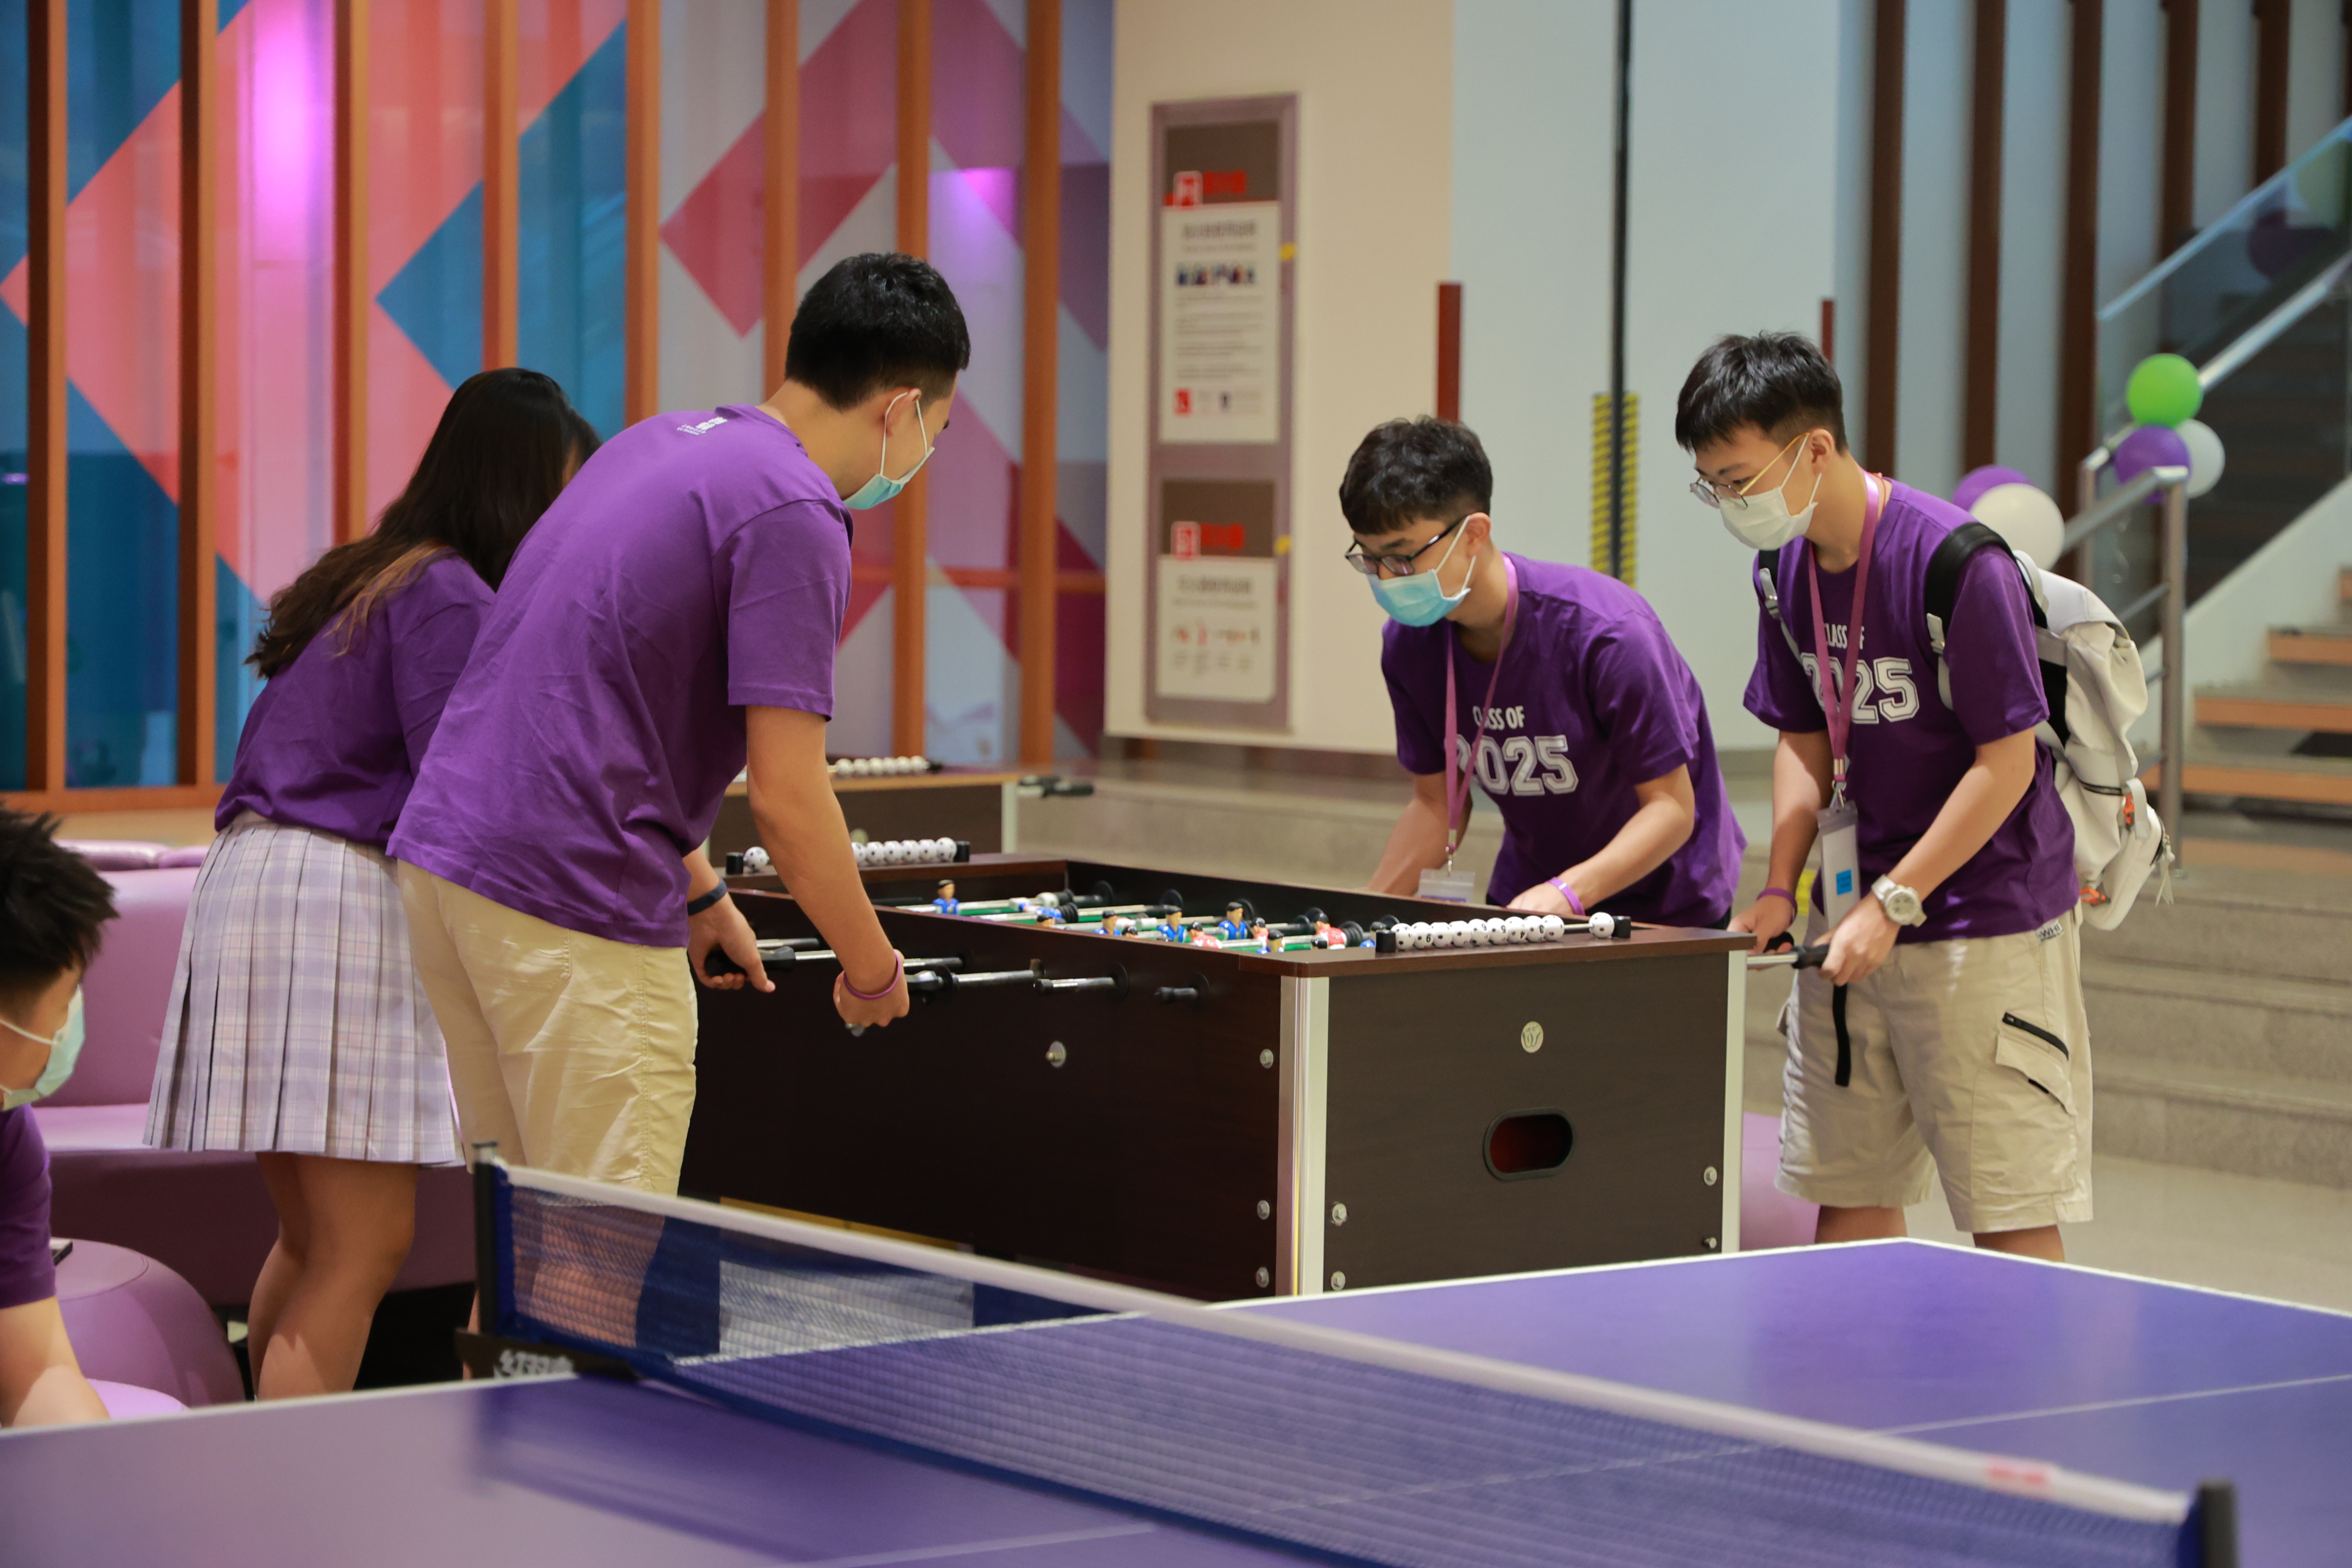 Students in purple shirts square off around a foosball table